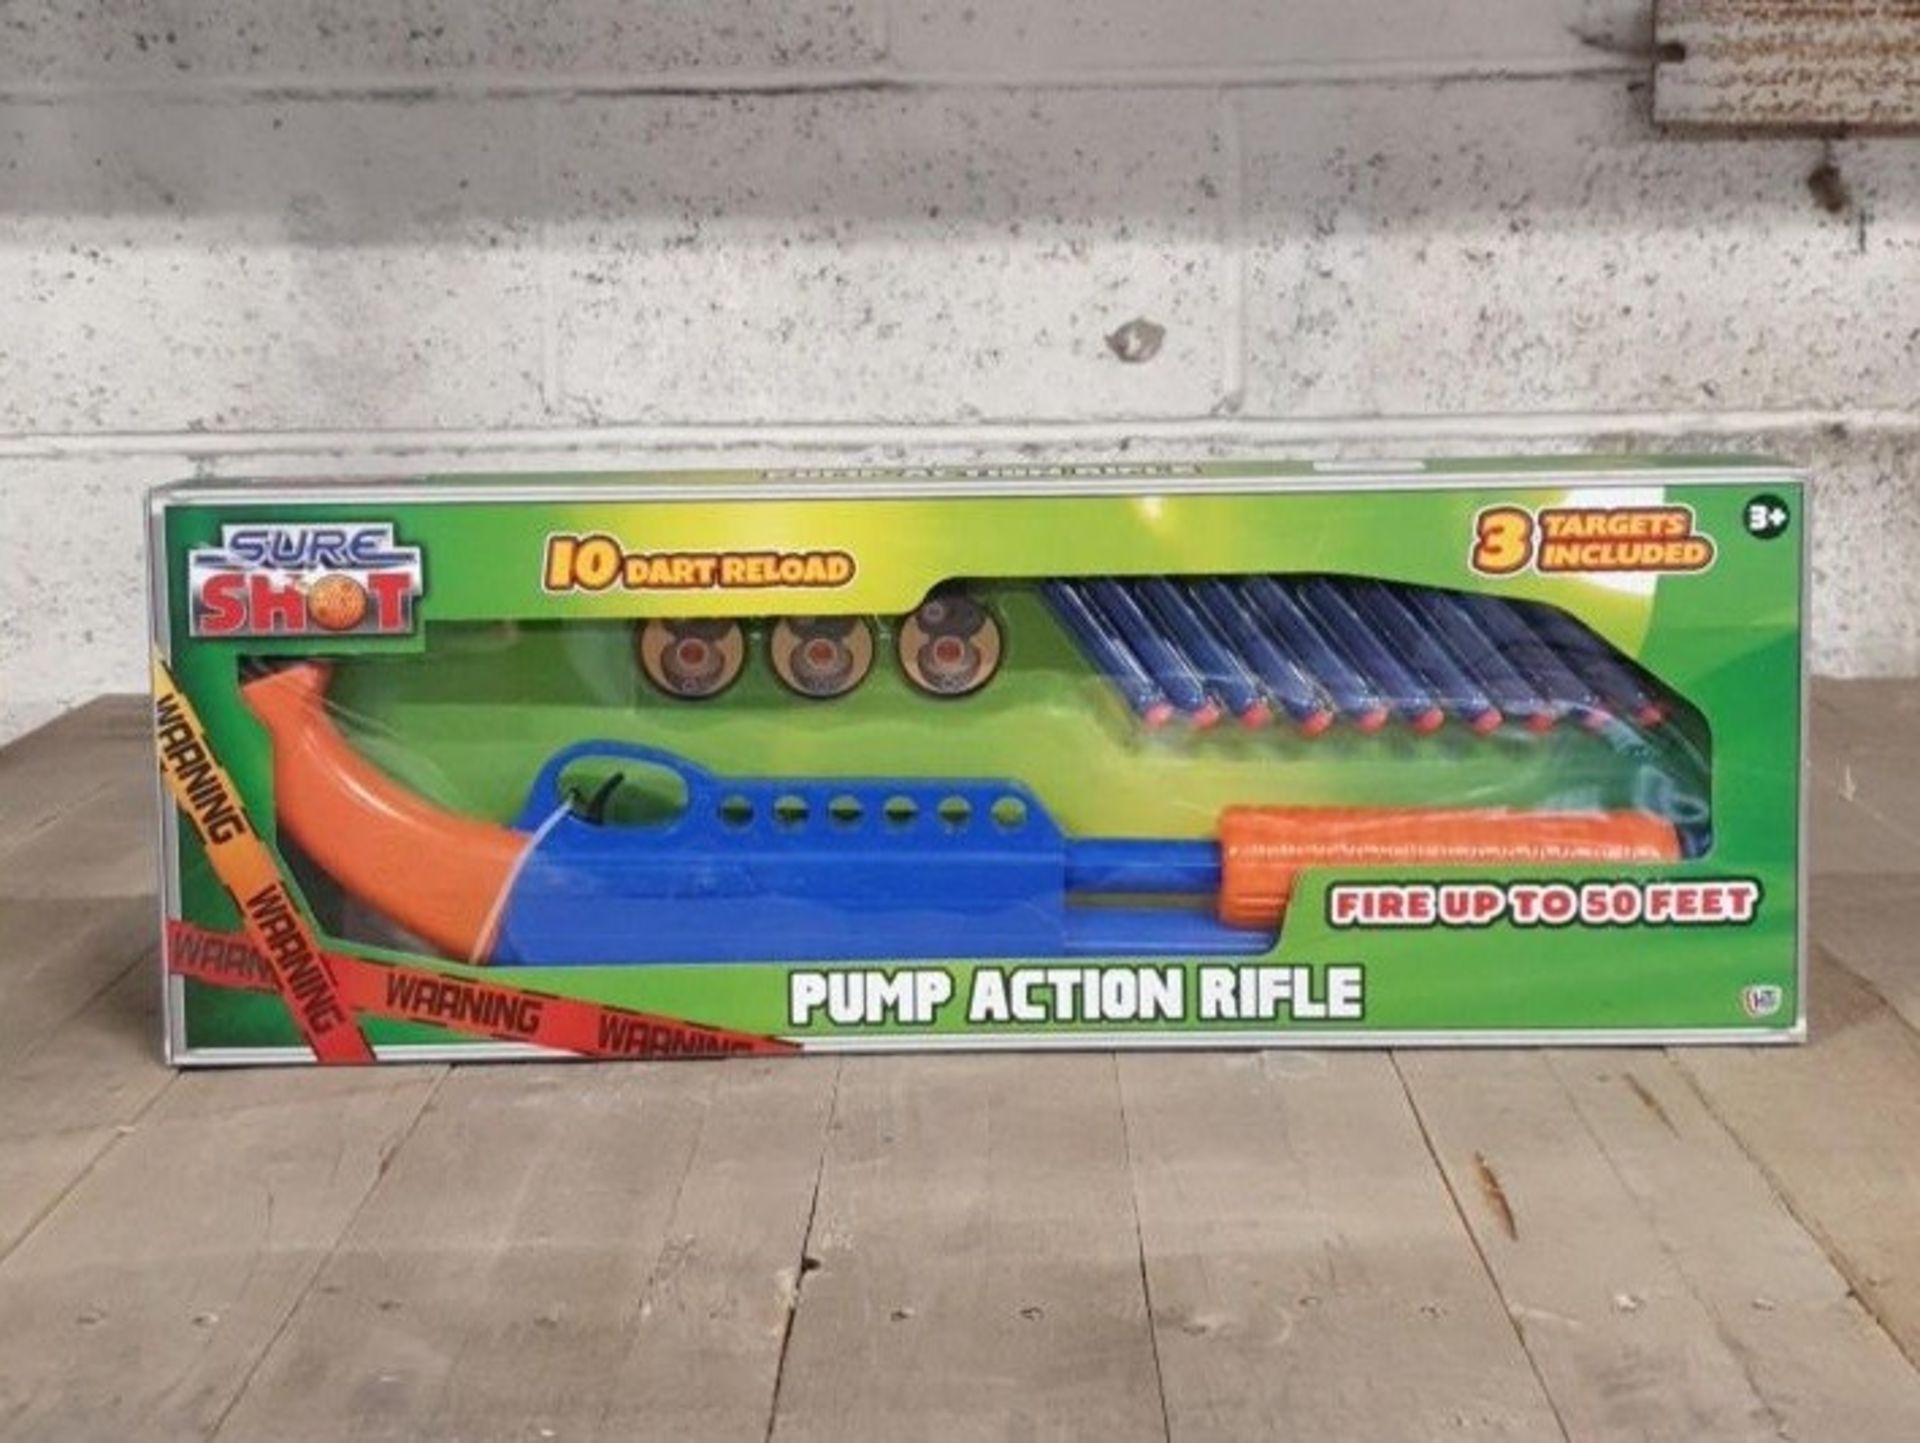 1 BOXED SURE SHOT PUMP ACTION RIFLE, FIRES UP TO 50 FEET (VIEWING HIGHLY RECOMMENDED)